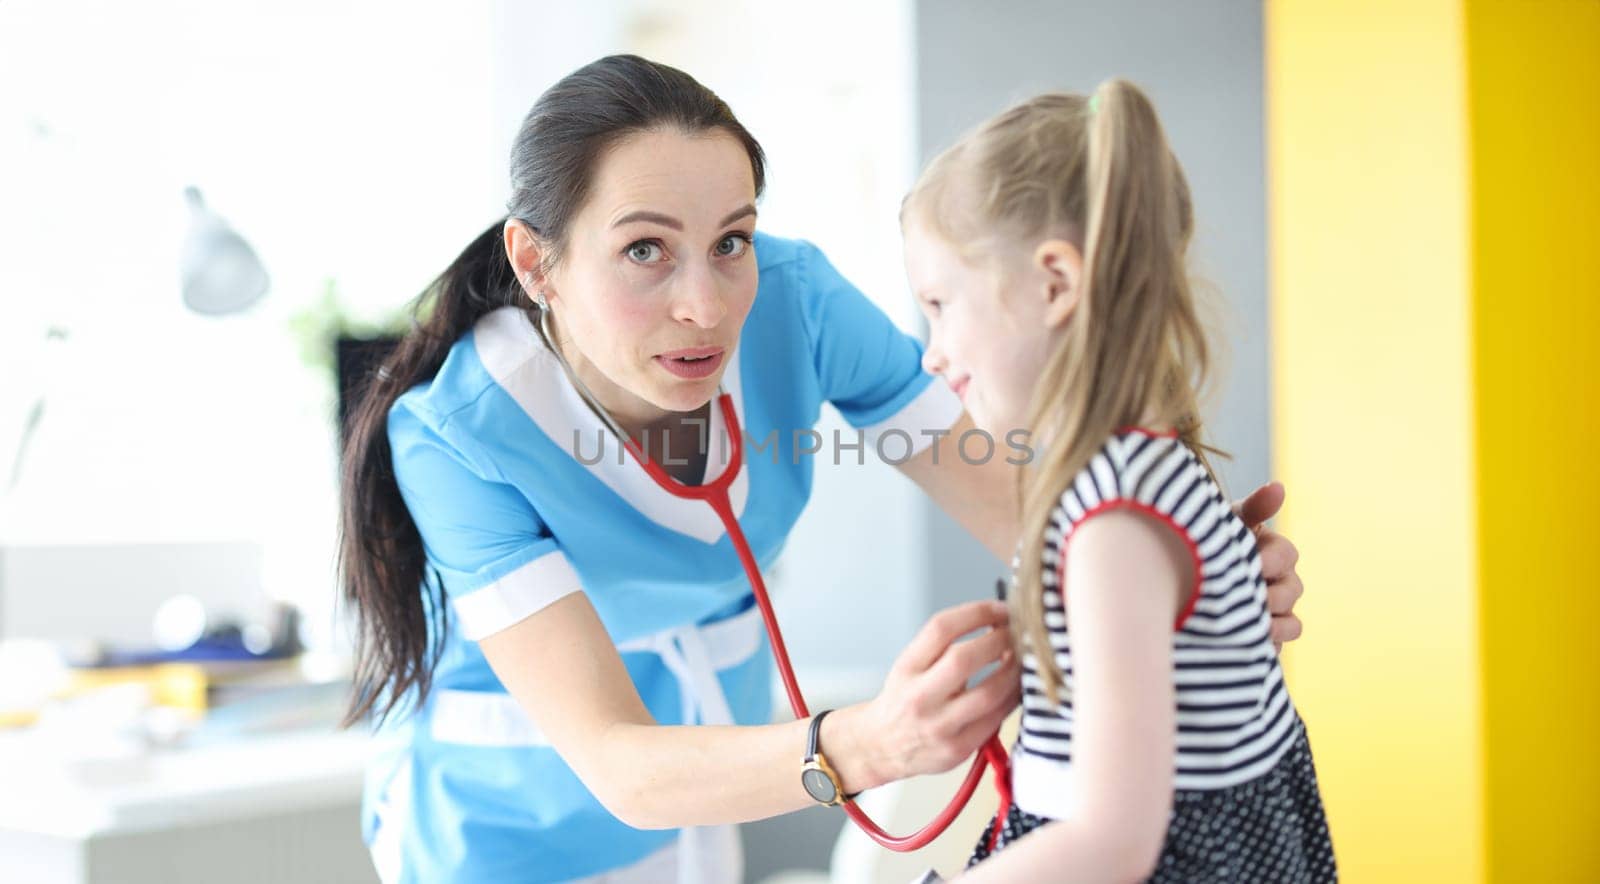 Doctor pediatrician forgot to put stethoscope in her ears. First day of work as doctor concept